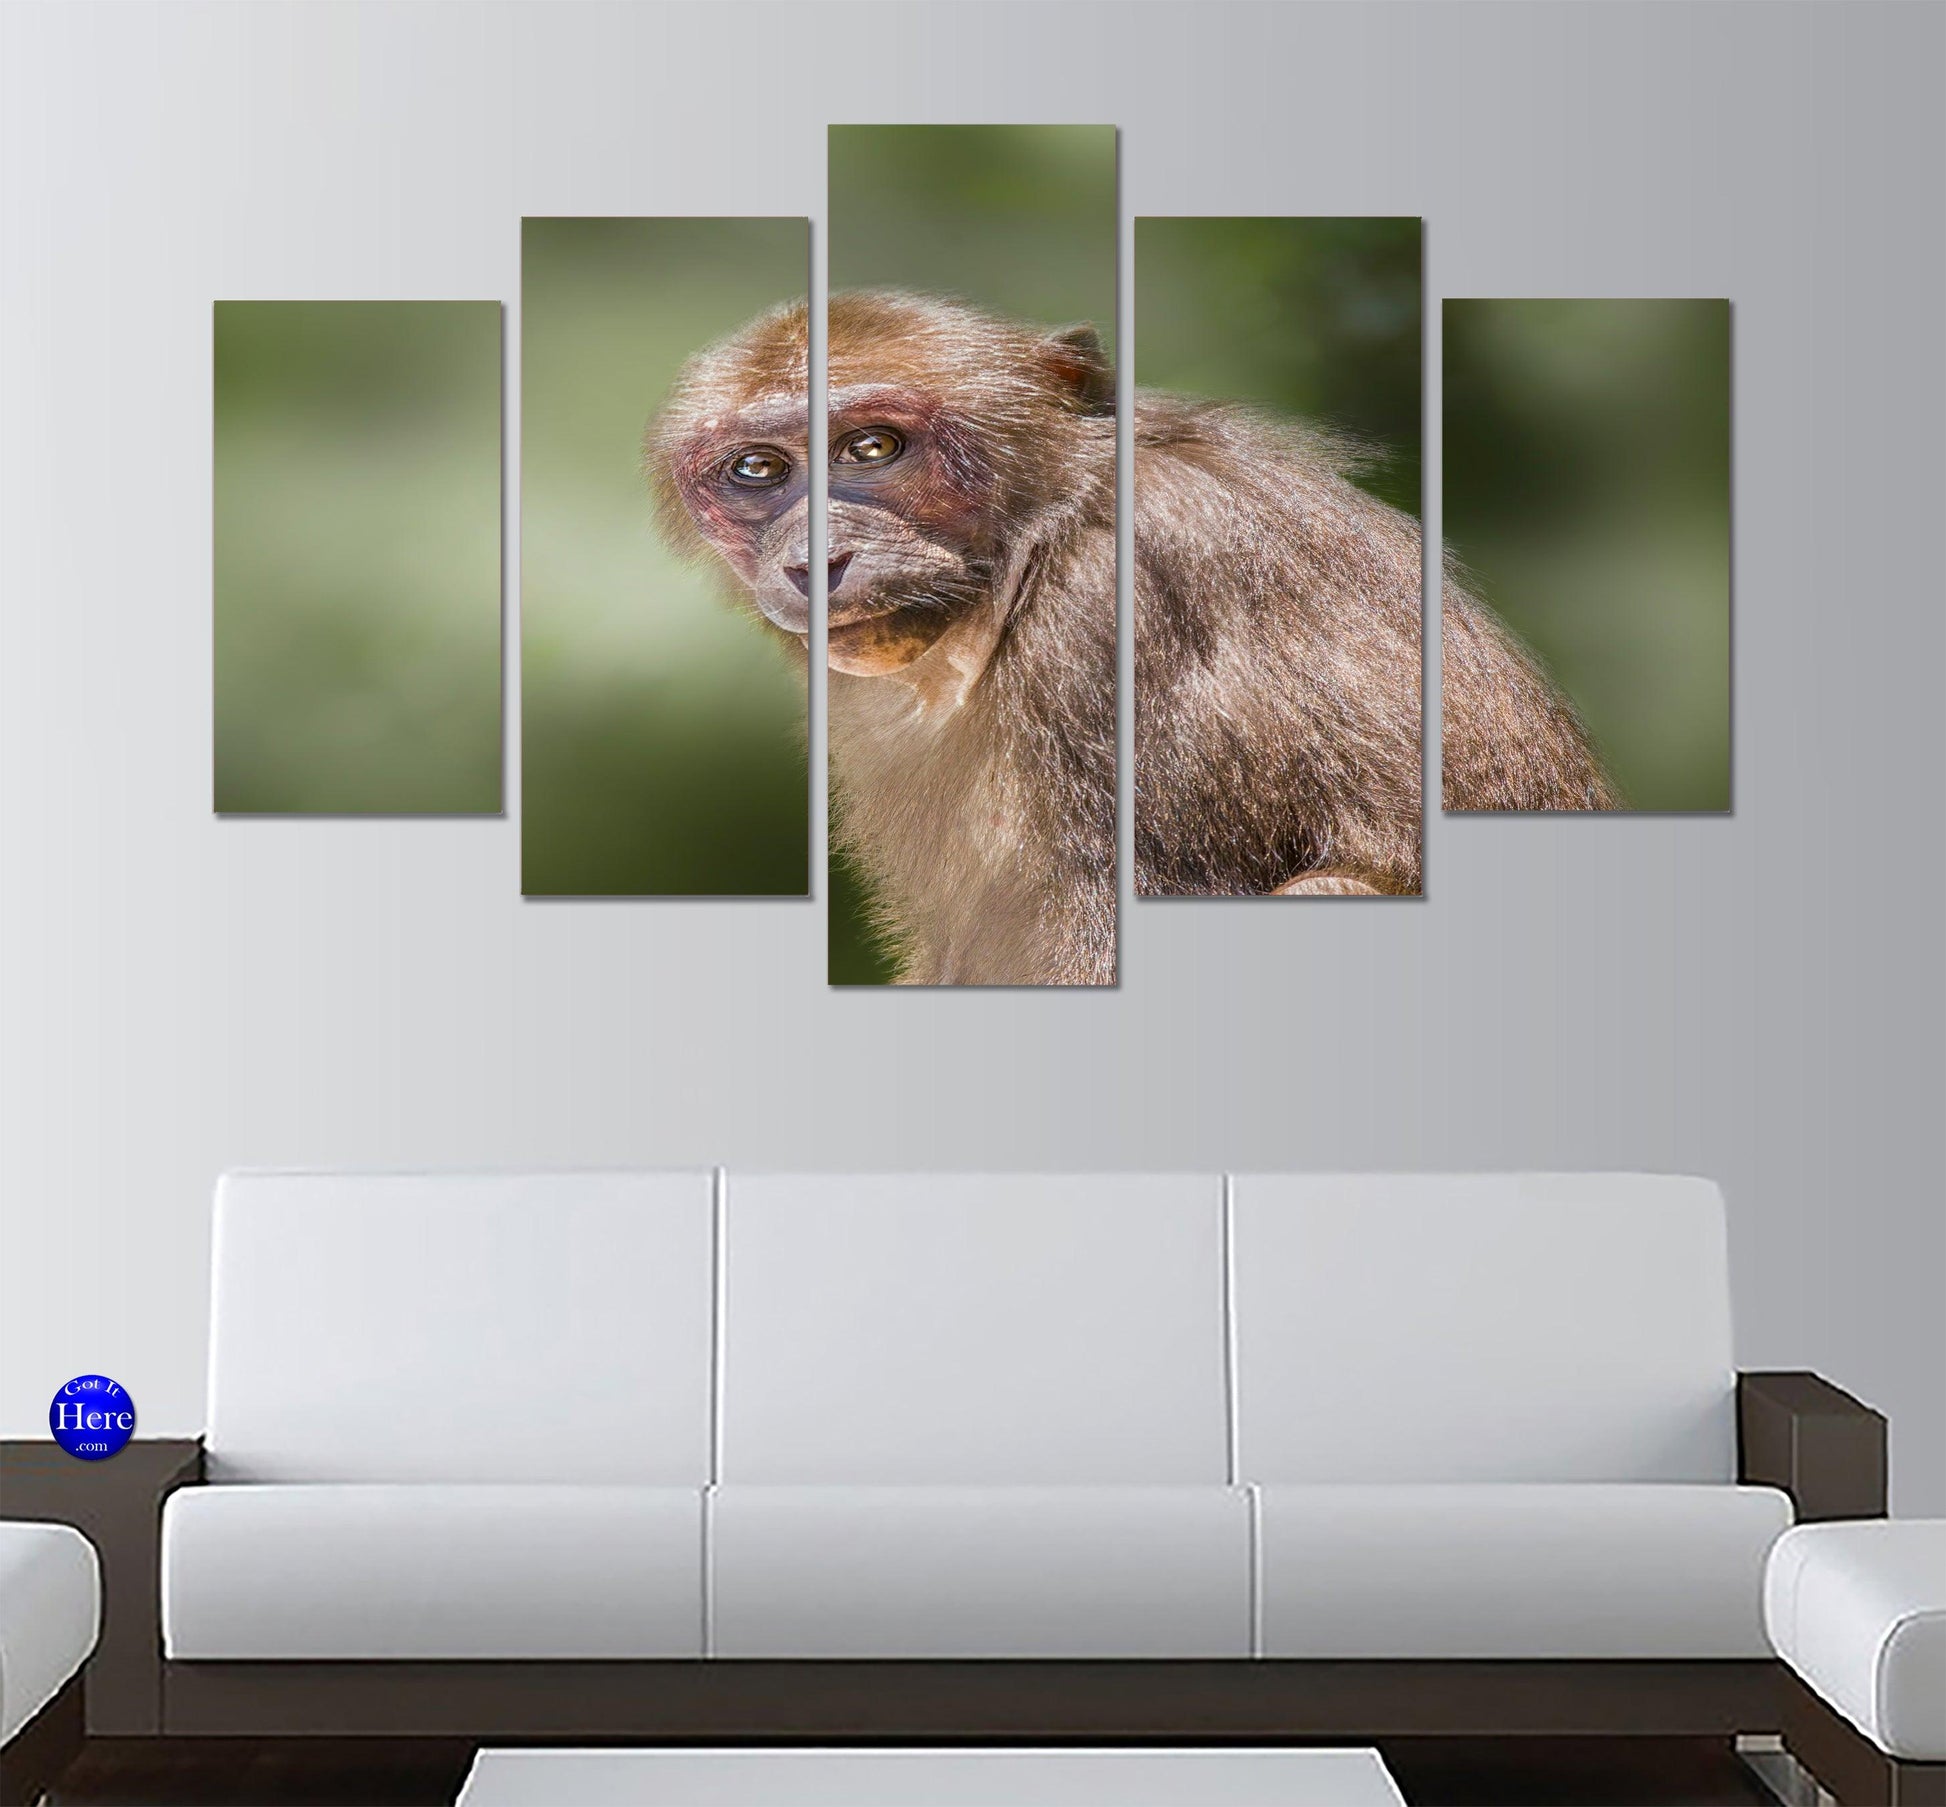 Stump Tailed Macaque 5 Panel Canvas Print Wall Art - GotItHere.com